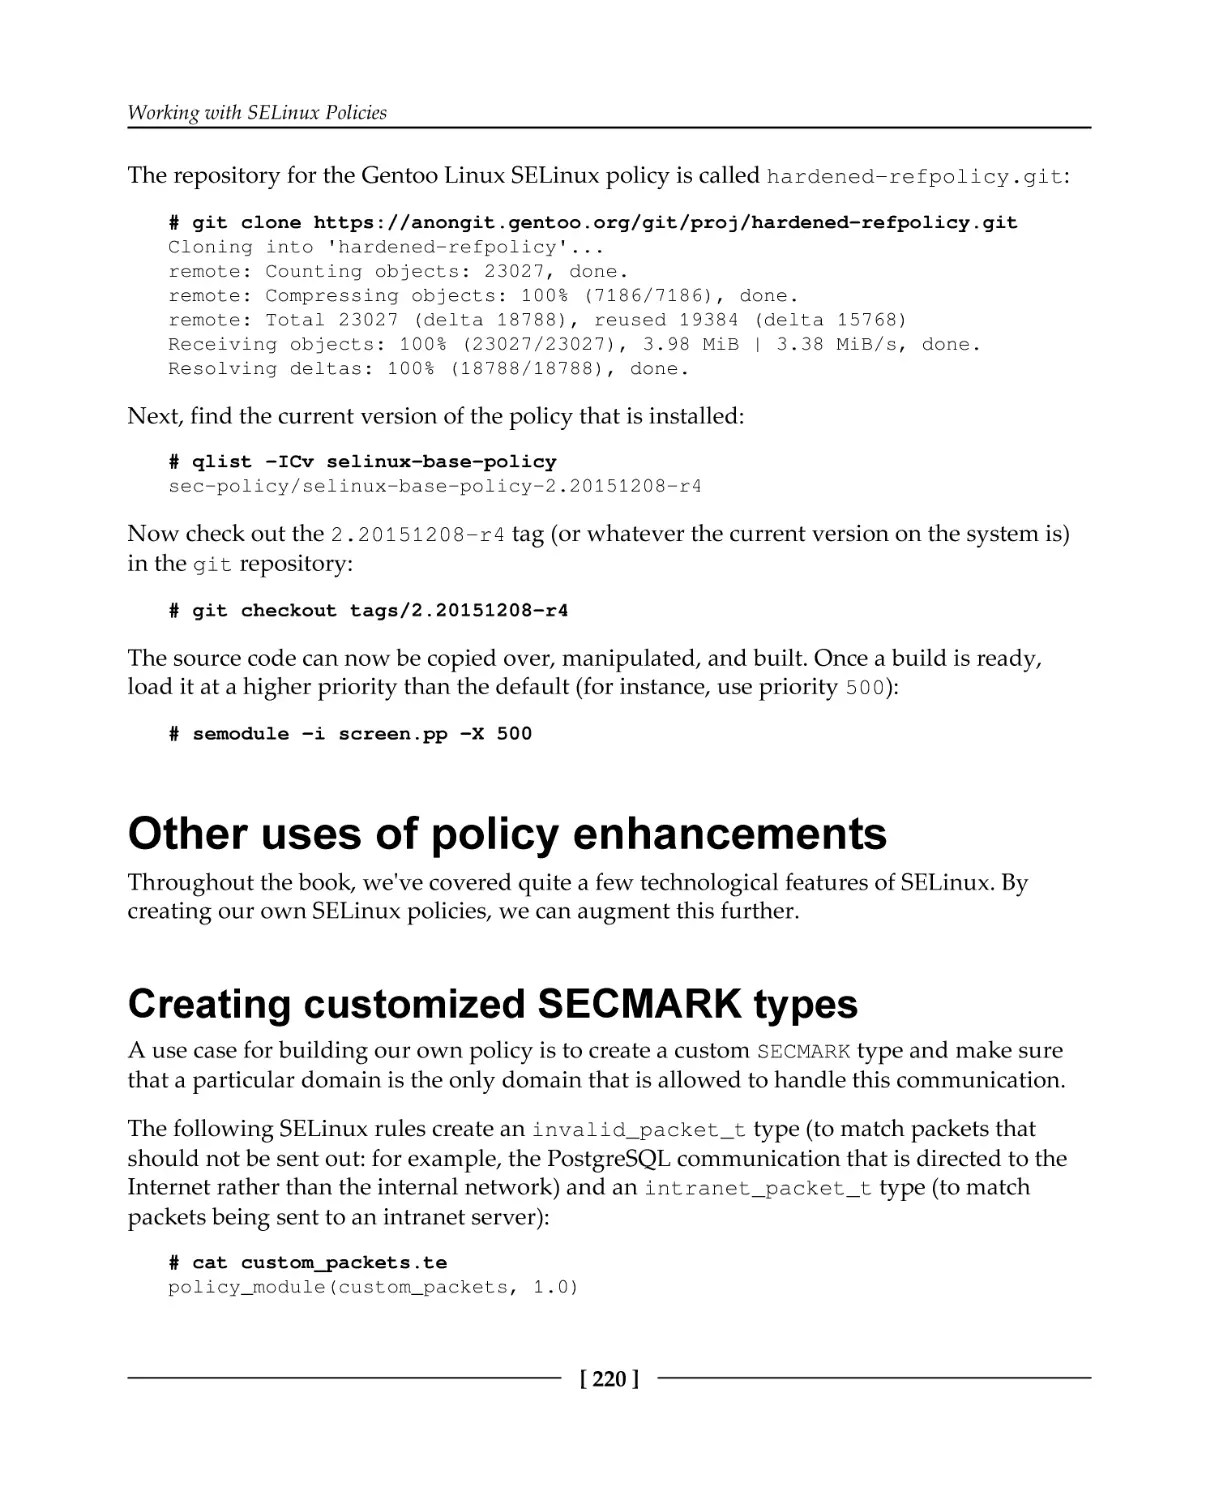 Other uses of policy enhancements
Creating customized SECMARK types